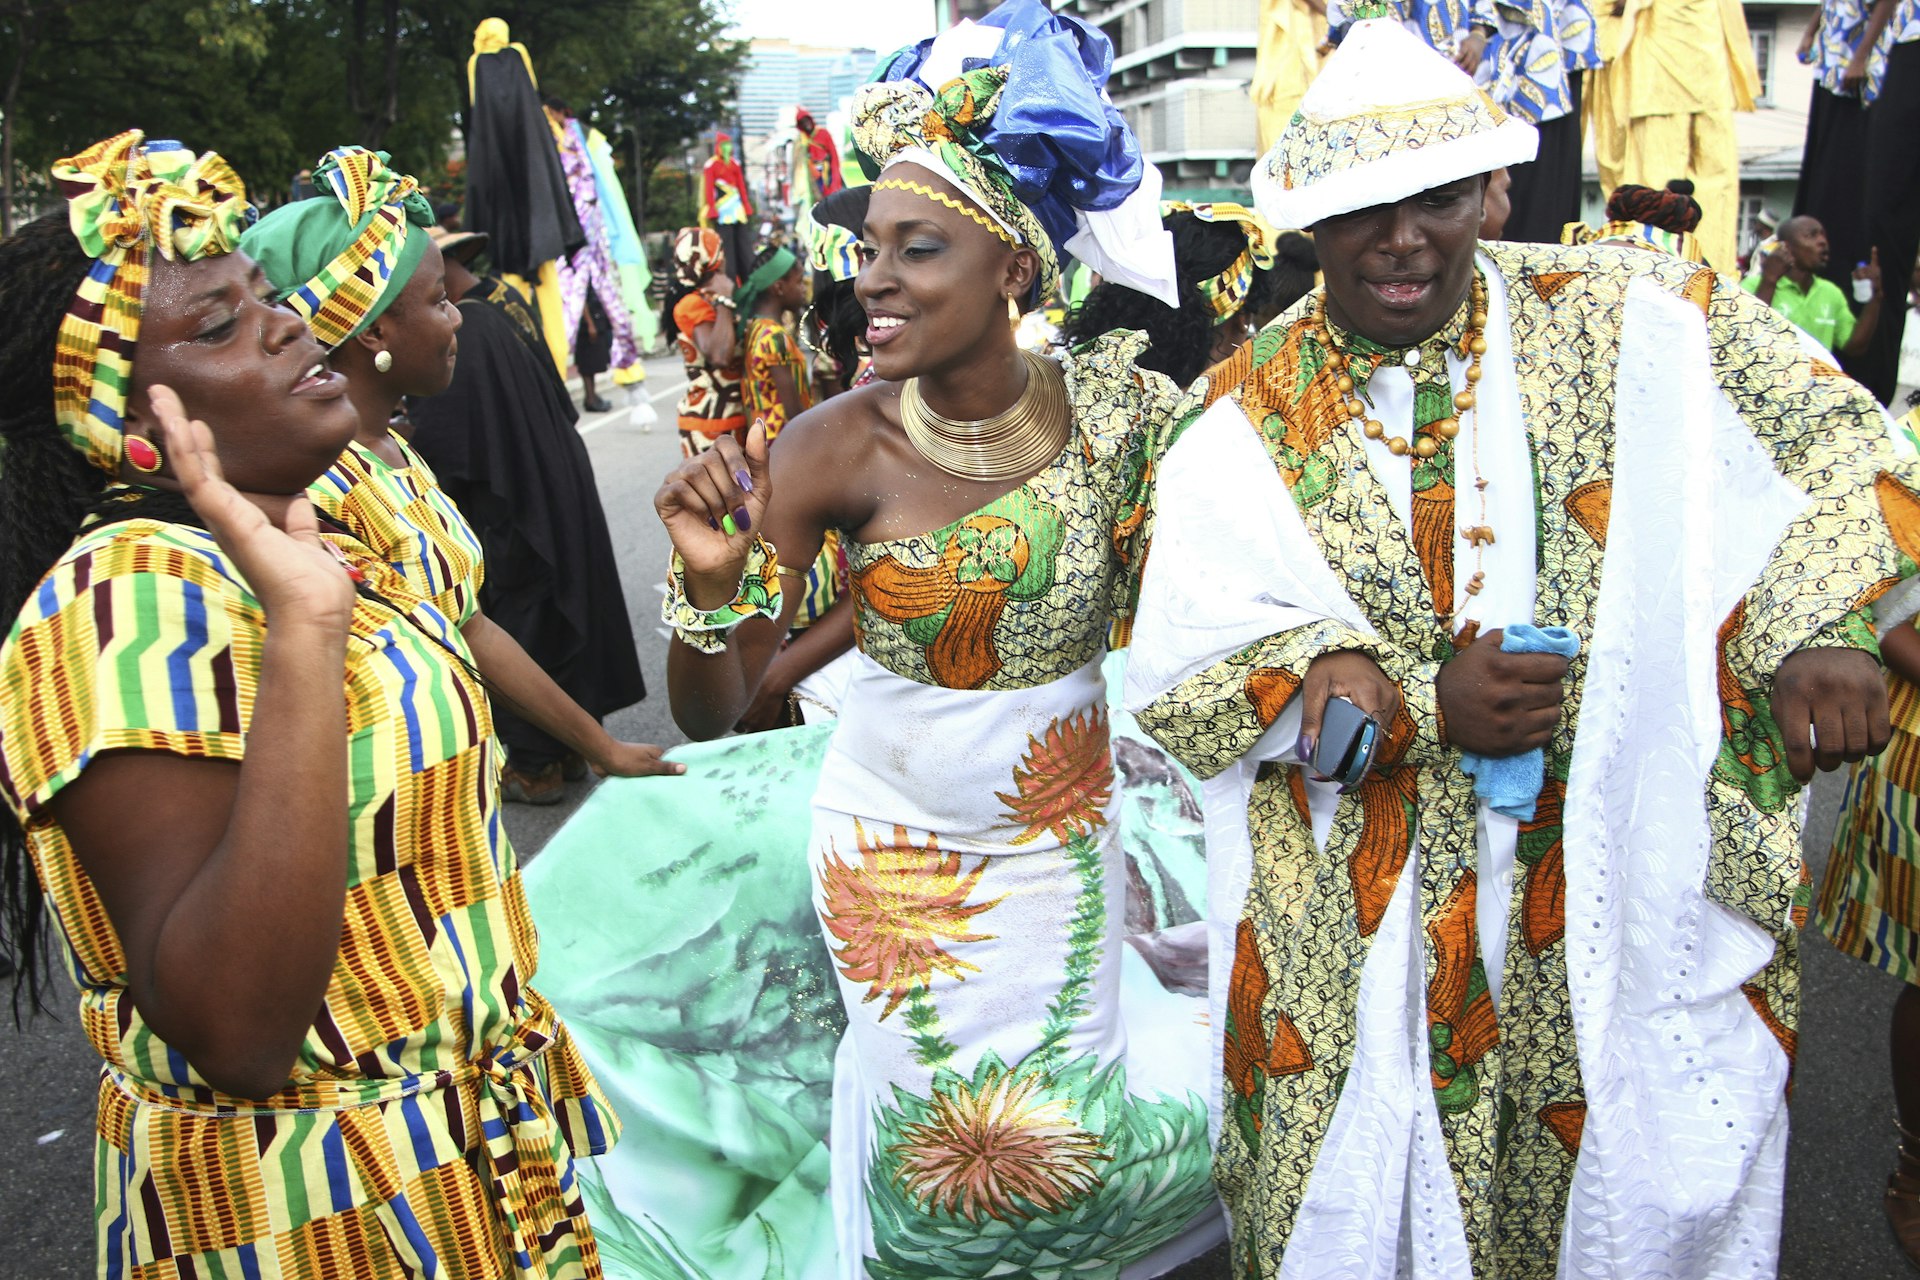 Camille Fraser (second from left) and Kendell Ettienne portray a queen and king at the annual Emancipation Day heritage celebration on August 1, 2014 in Port of Spain, Trinidad. Sean Drakes/LatinContent/Getty Images